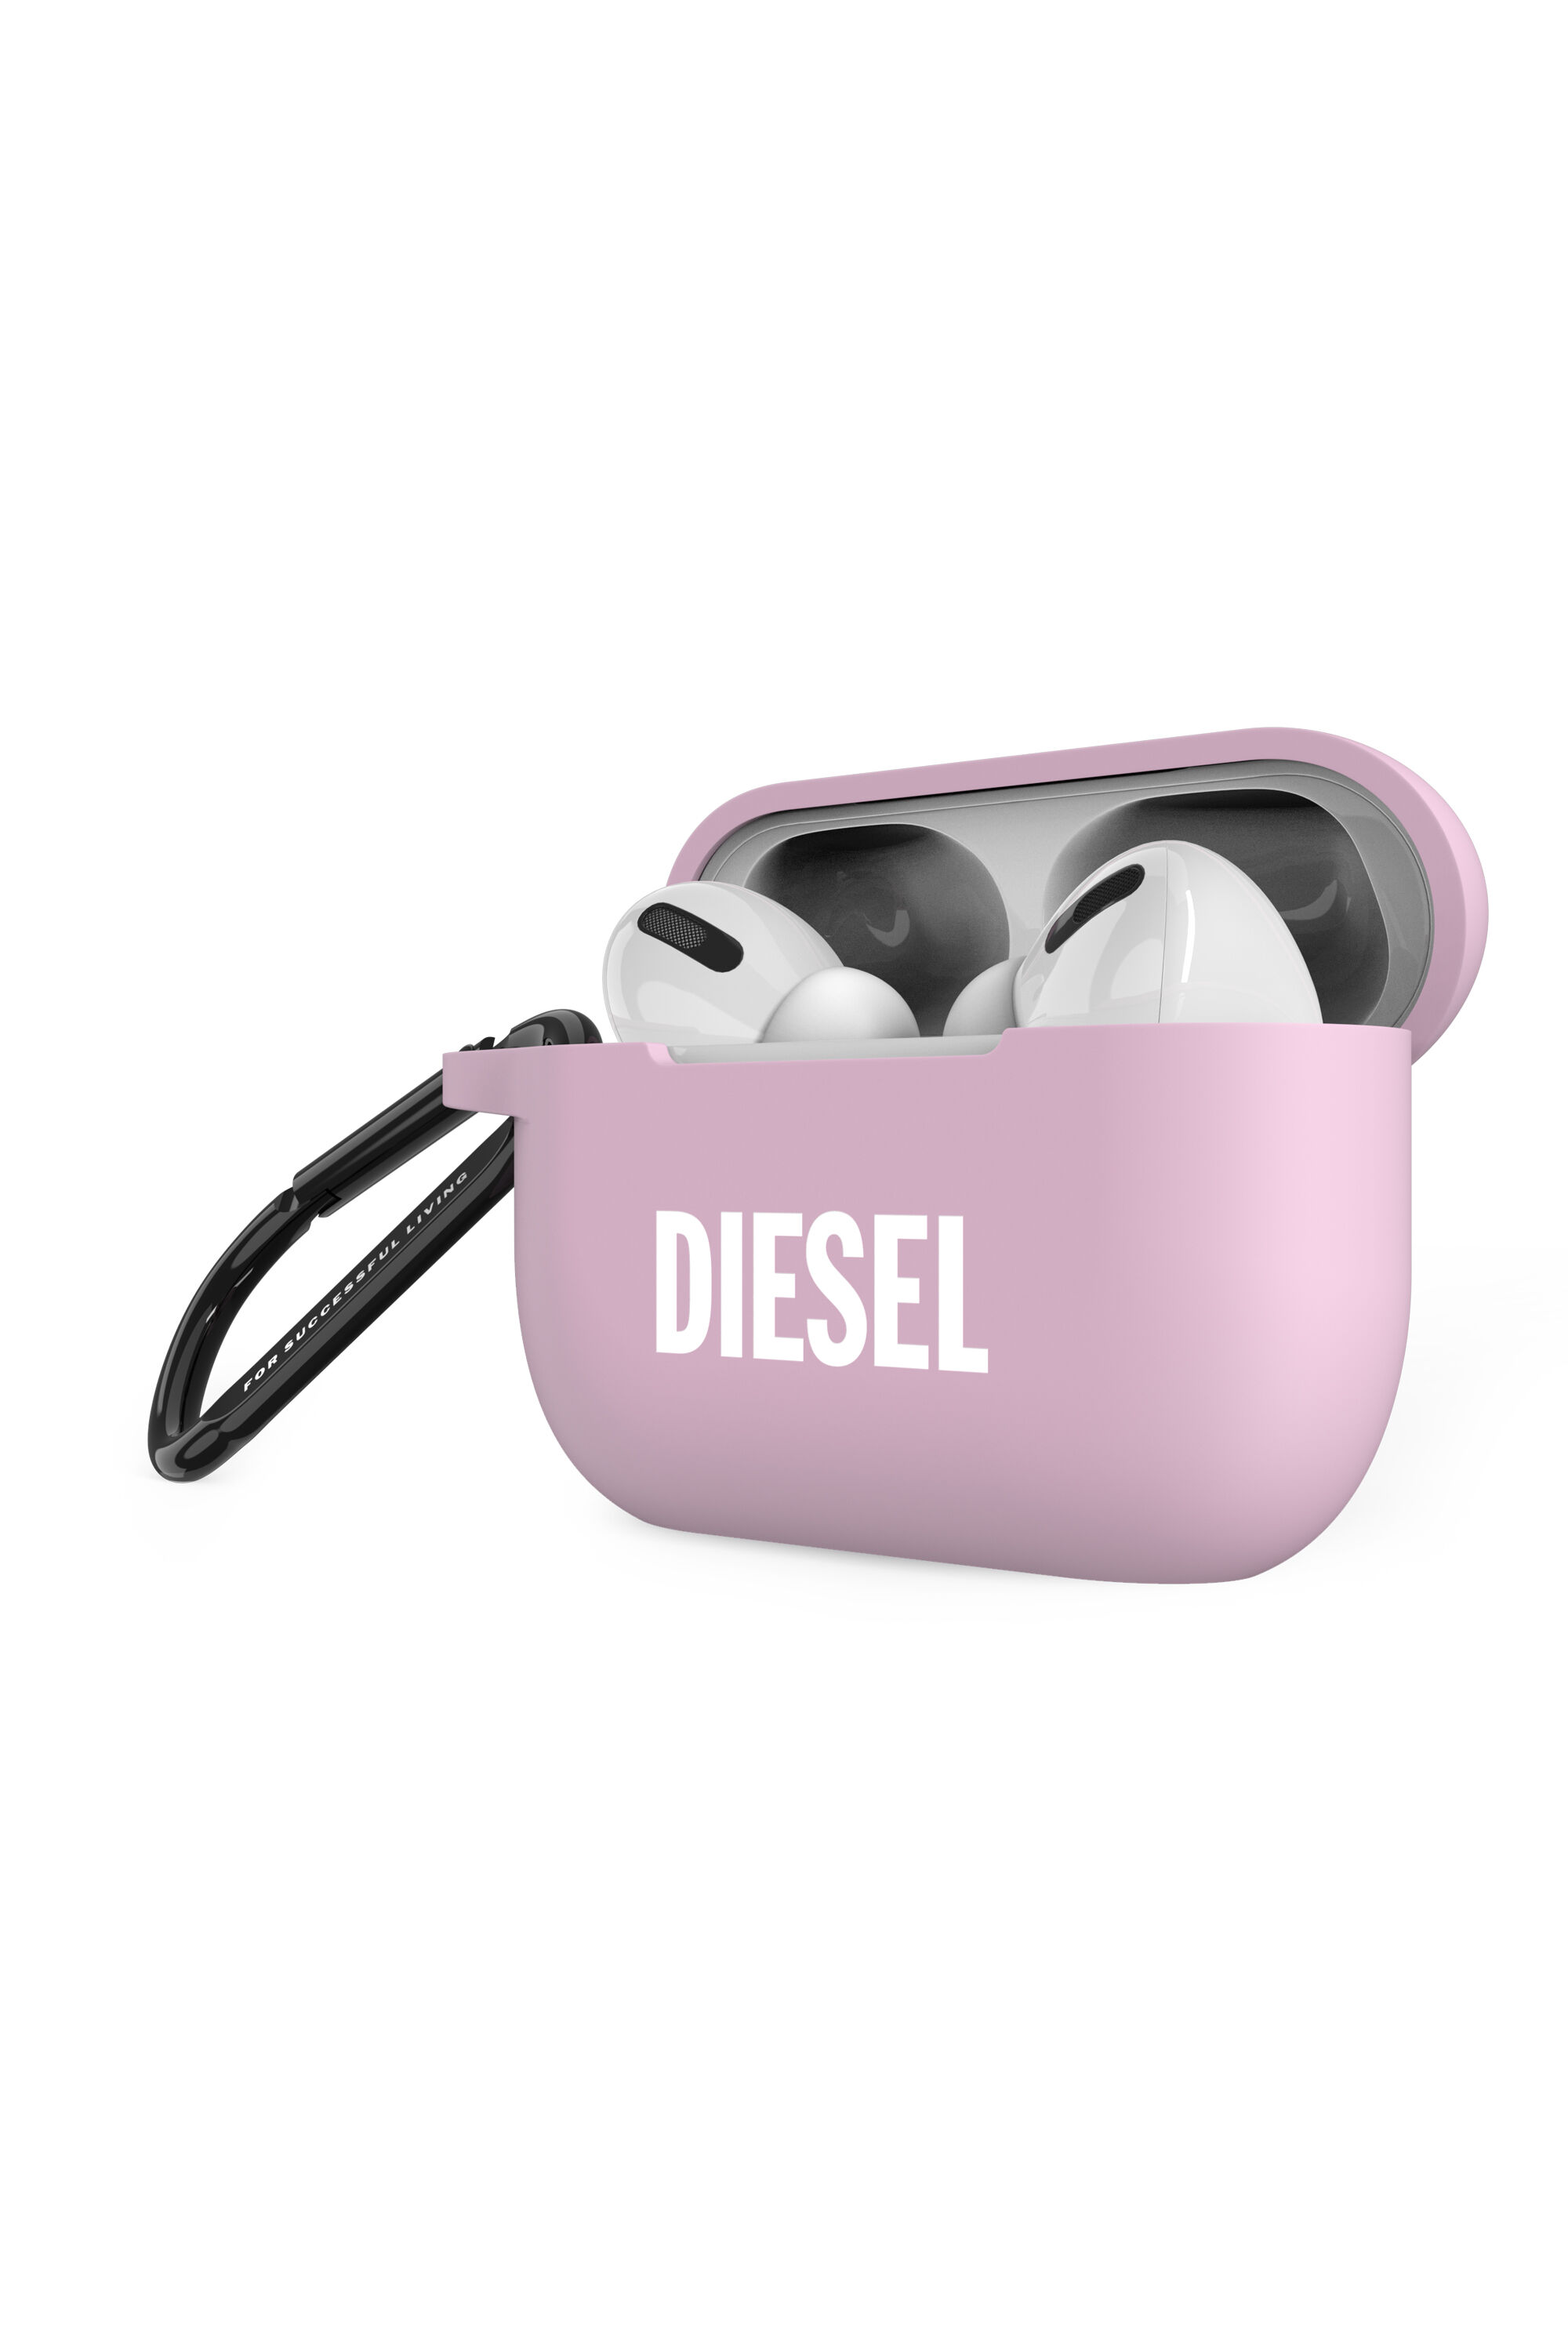 Diesel - 49862 AIRPOD CASE, Unisex Airpodcase silicone for AirPods pro in Pink - Image 3